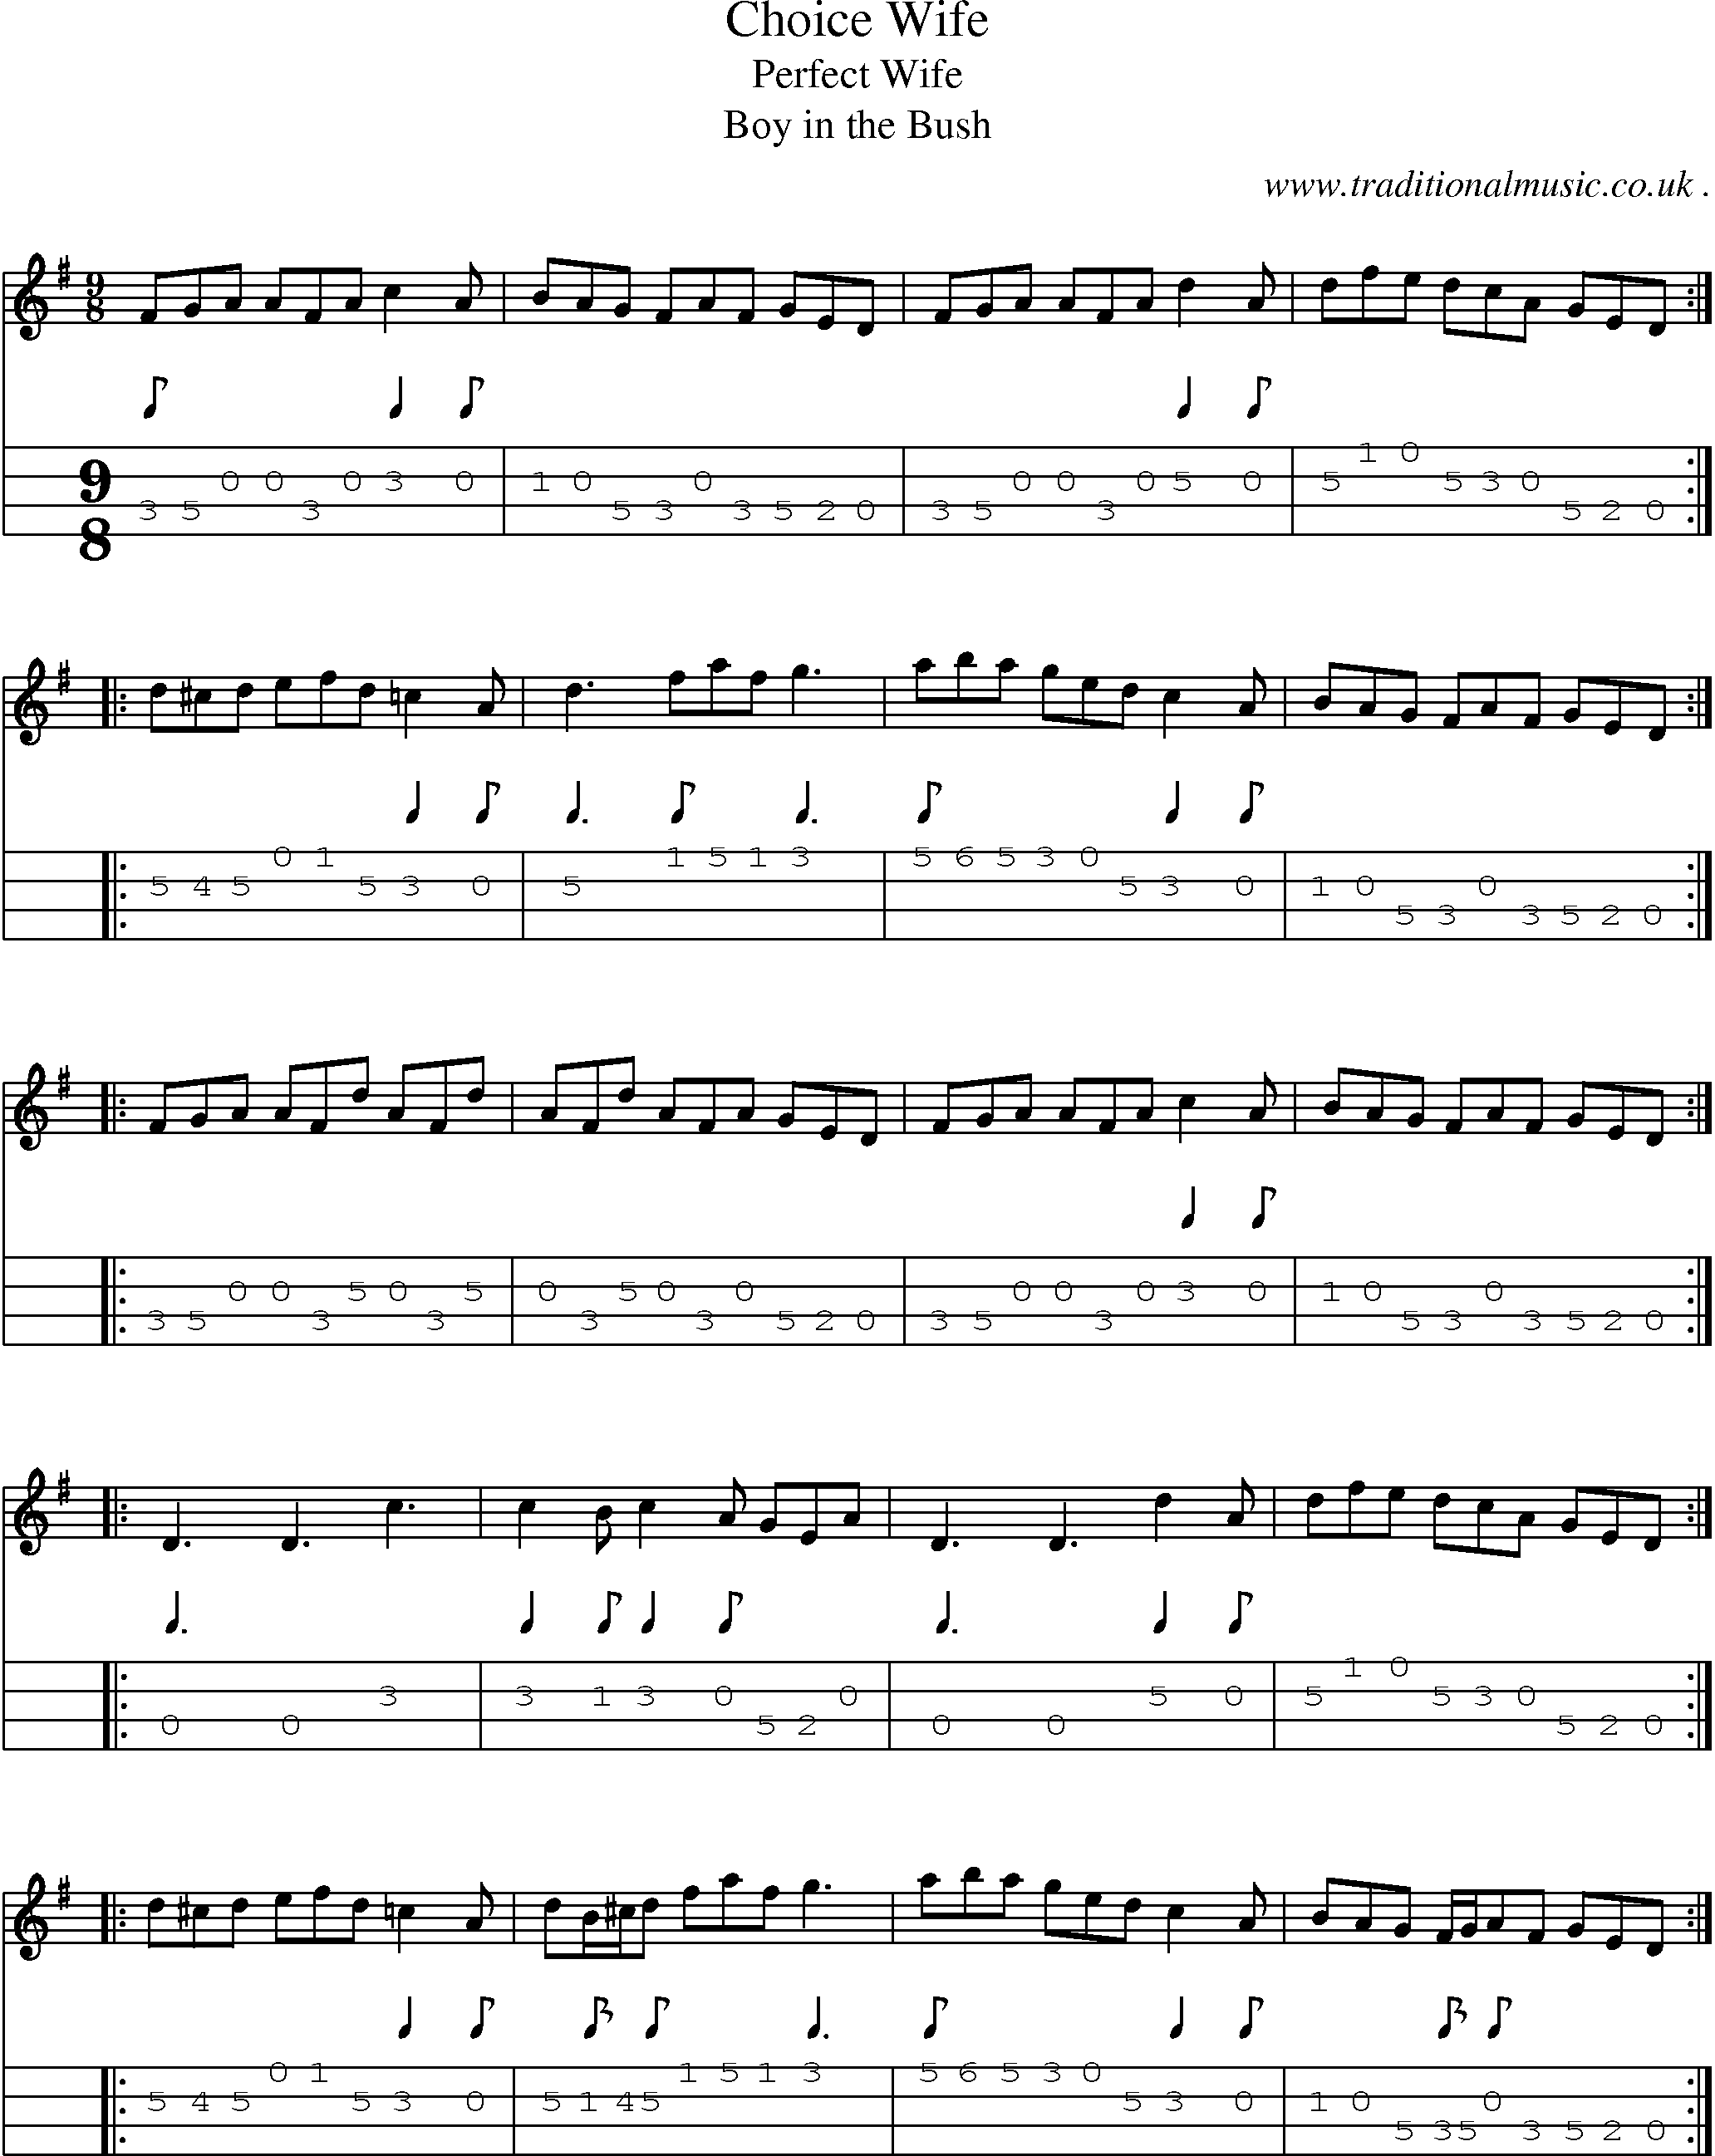 Sheet-Music and Mandolin Tabs for Choice Wife